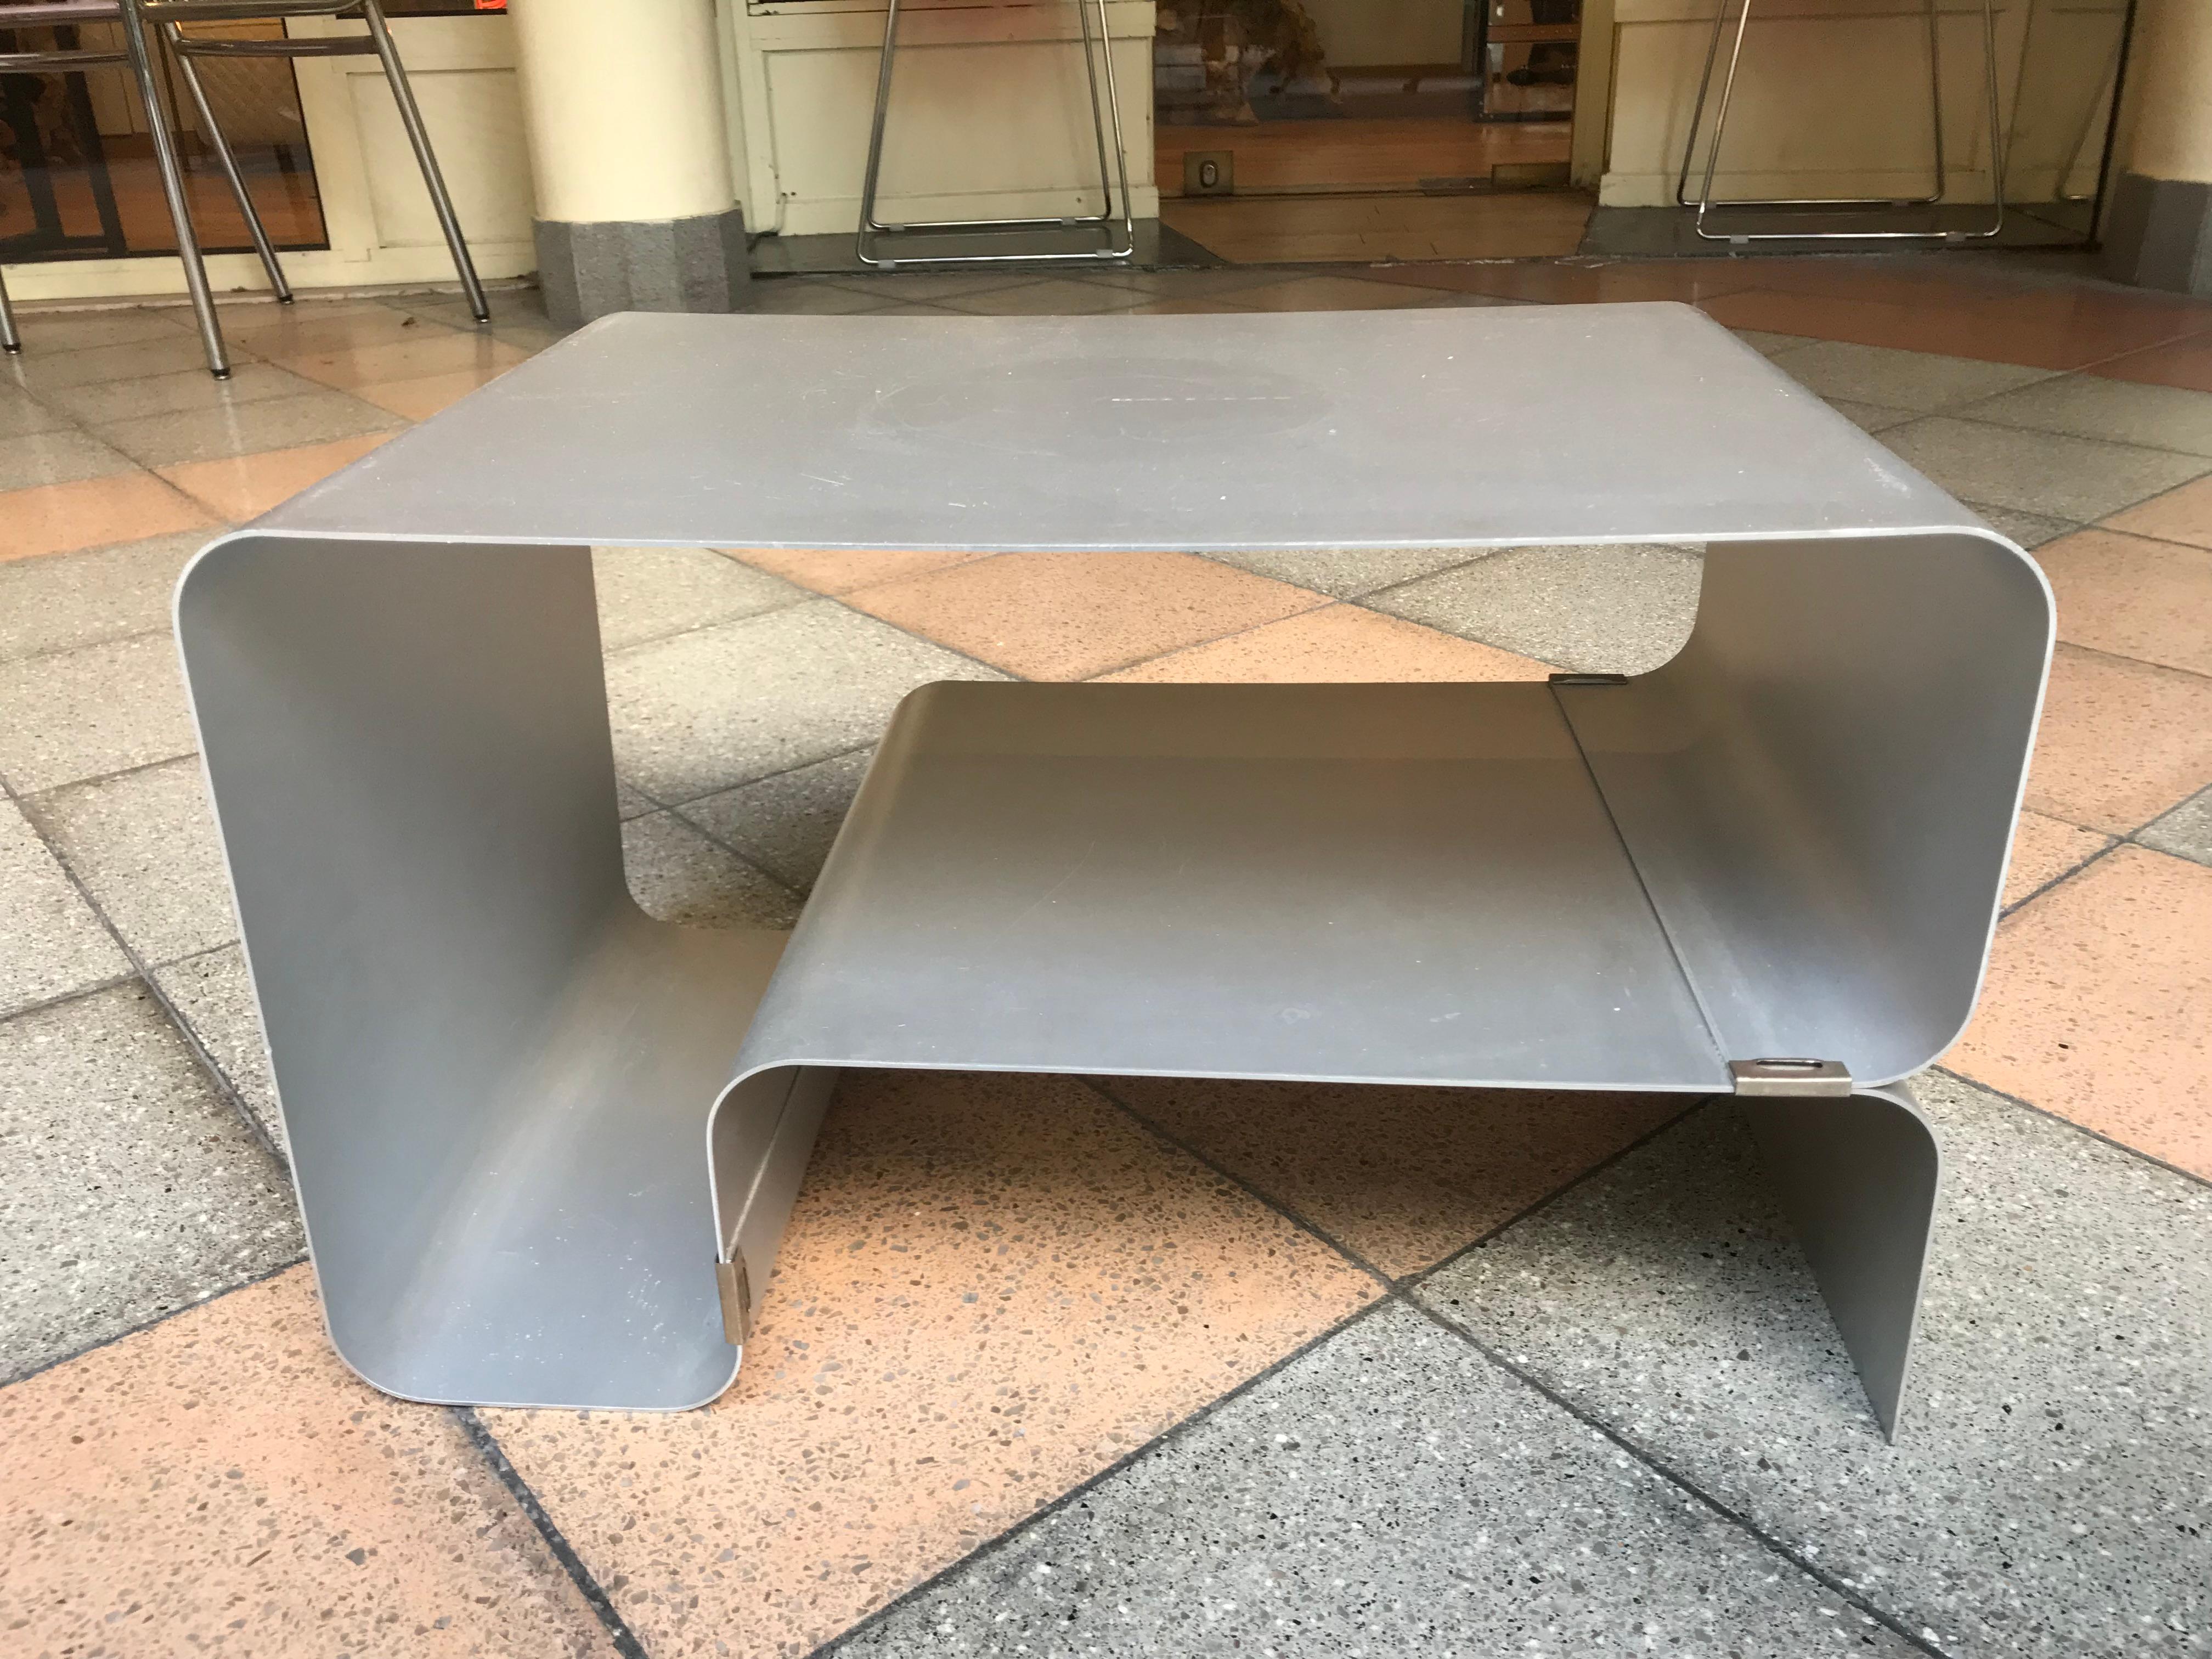 Joelle Ferlande
Coffee table
In stainless steel sheet folded and ringed, with two superimposed trays.
Kappa edition,
circa 1970.
High. 33 cm, length 53 cm, Prof. 36 cm
590 euros.